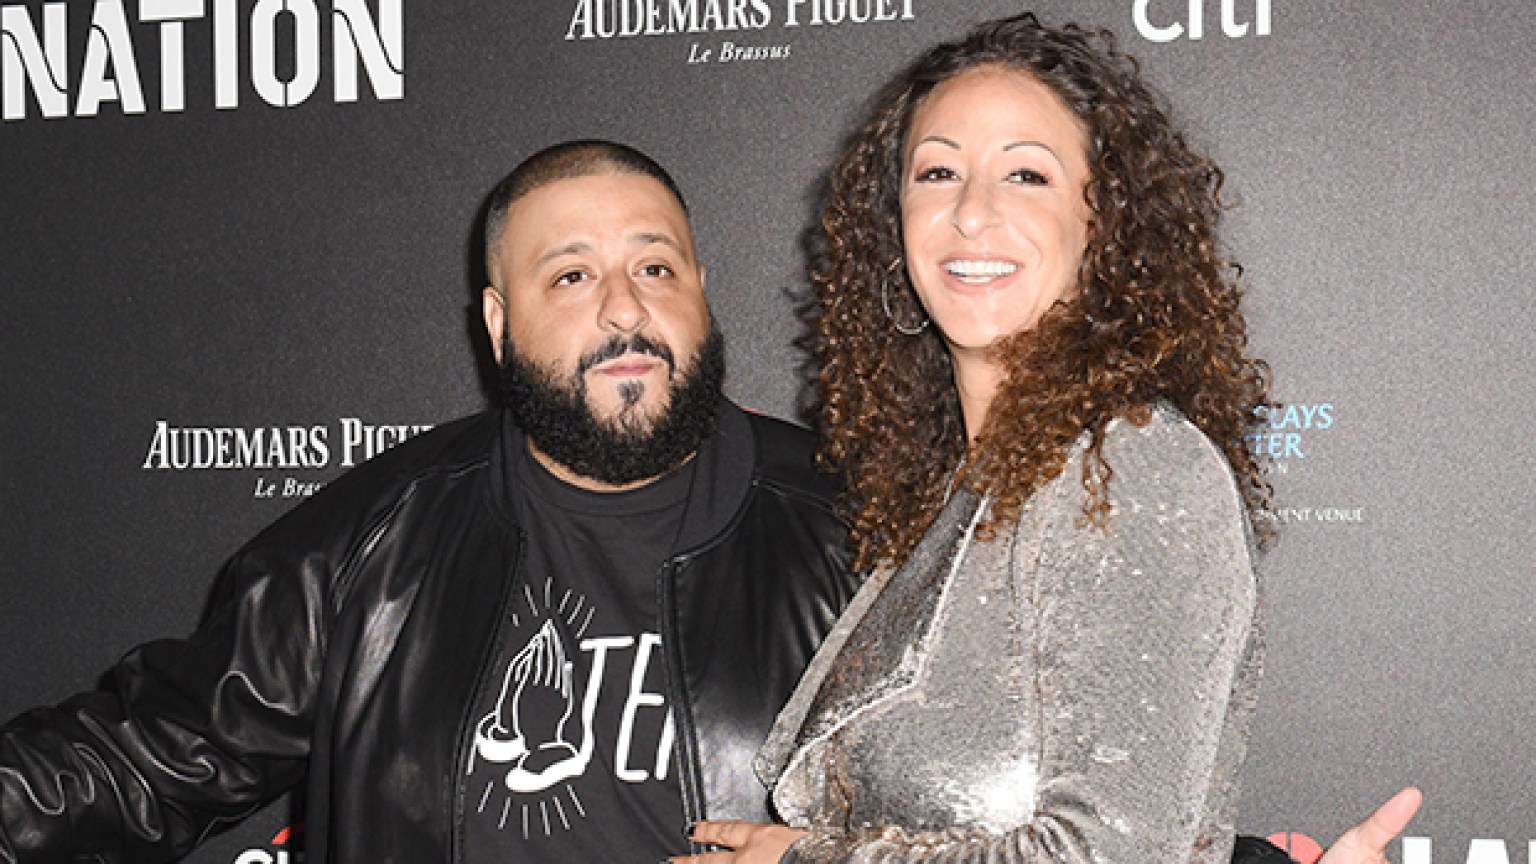 Dj Khaled On Oral Sex With Wife Trolled For Not Going Down On Her